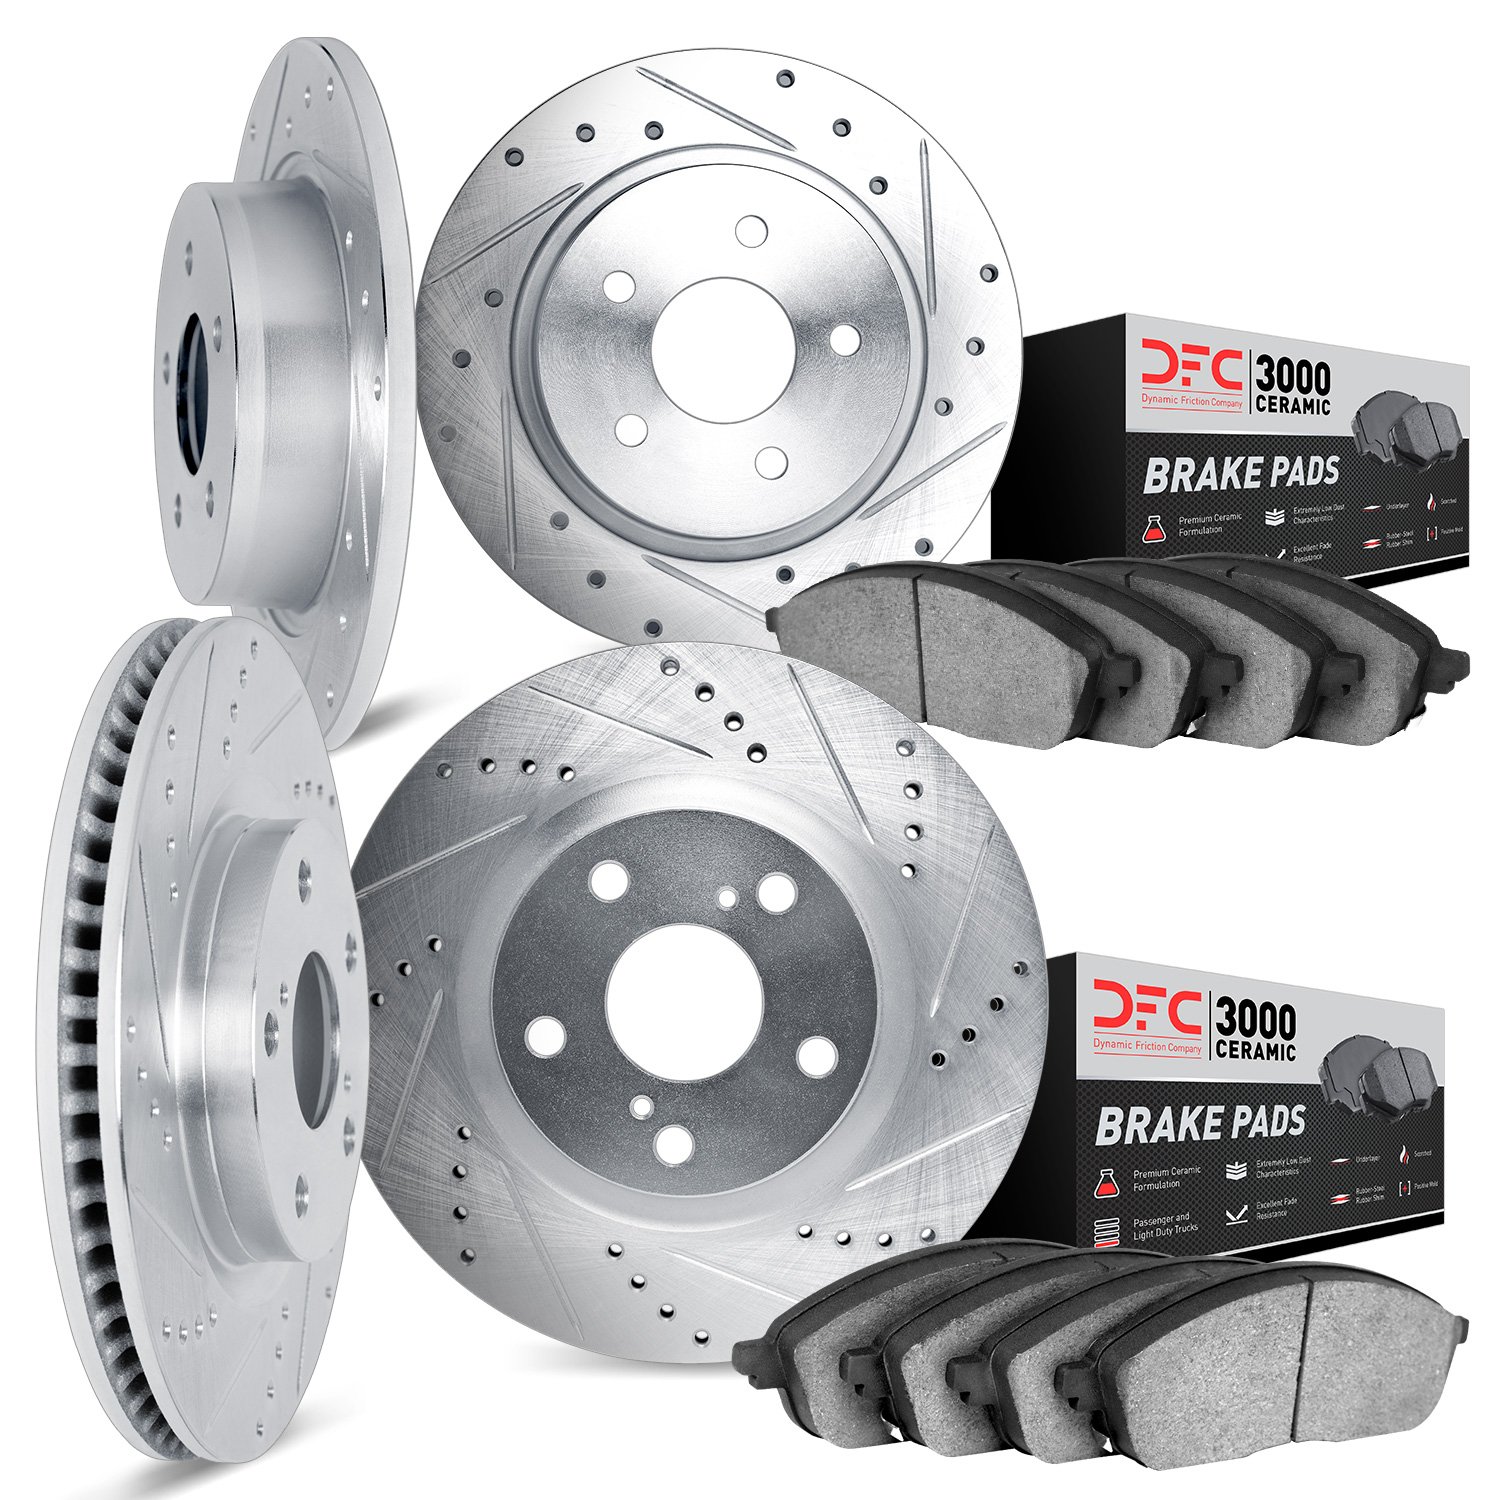 7304-54091 Drilled/Slotted Brake Rotor with 3000-Series Ceramic Brake Pads Kit [Silver], 2009-2010 Ford/Lincoln/Mercury/Mazda, P